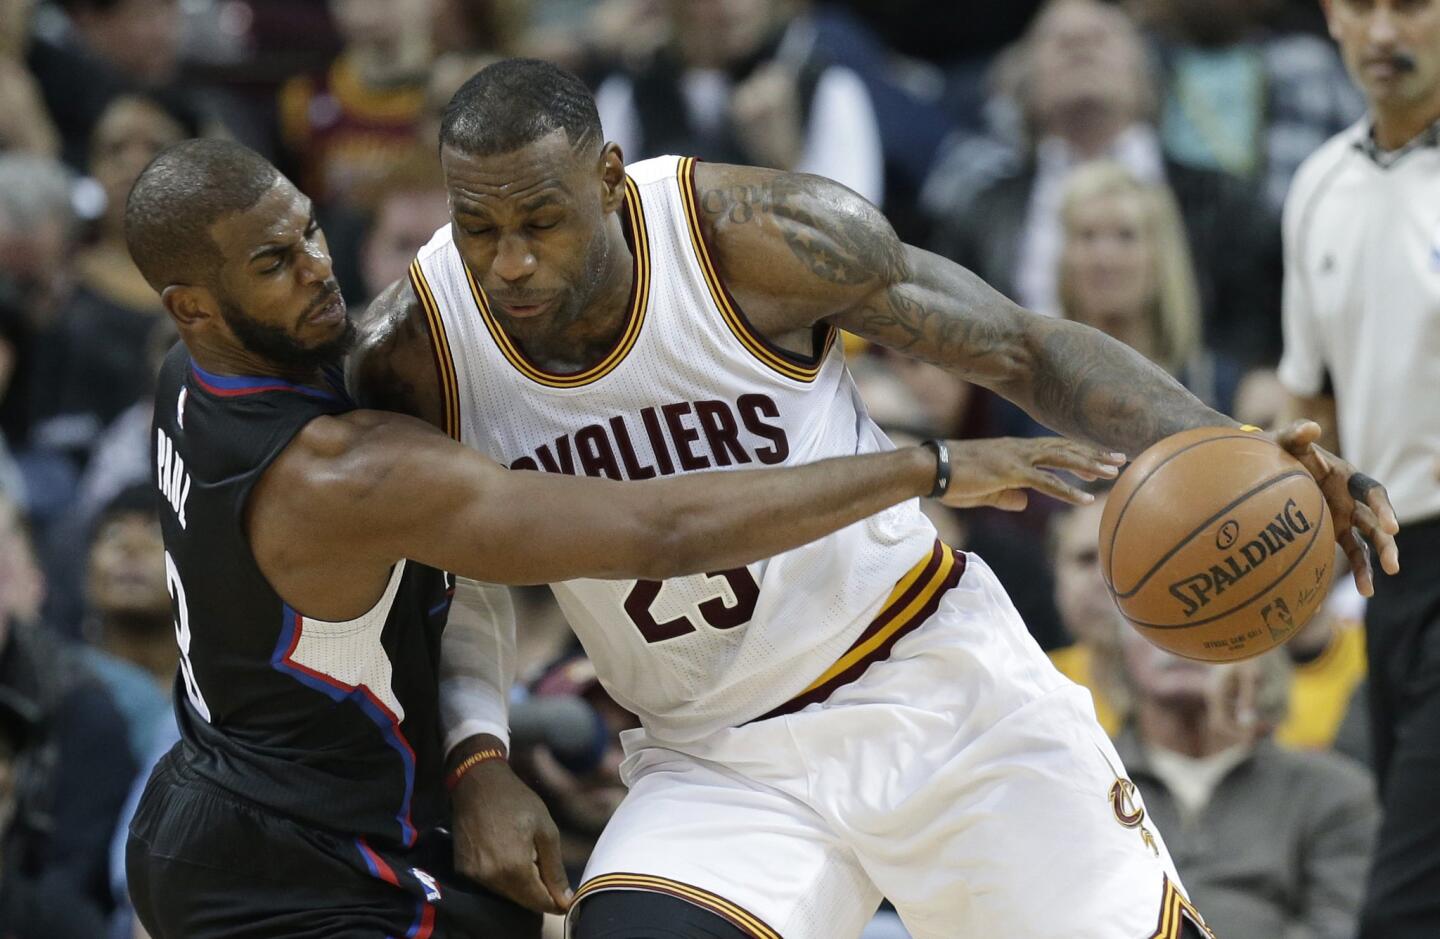 Clippers point guard Chris Paul tries to steal the ball from Cavaliers forward LeBron James during the second half.